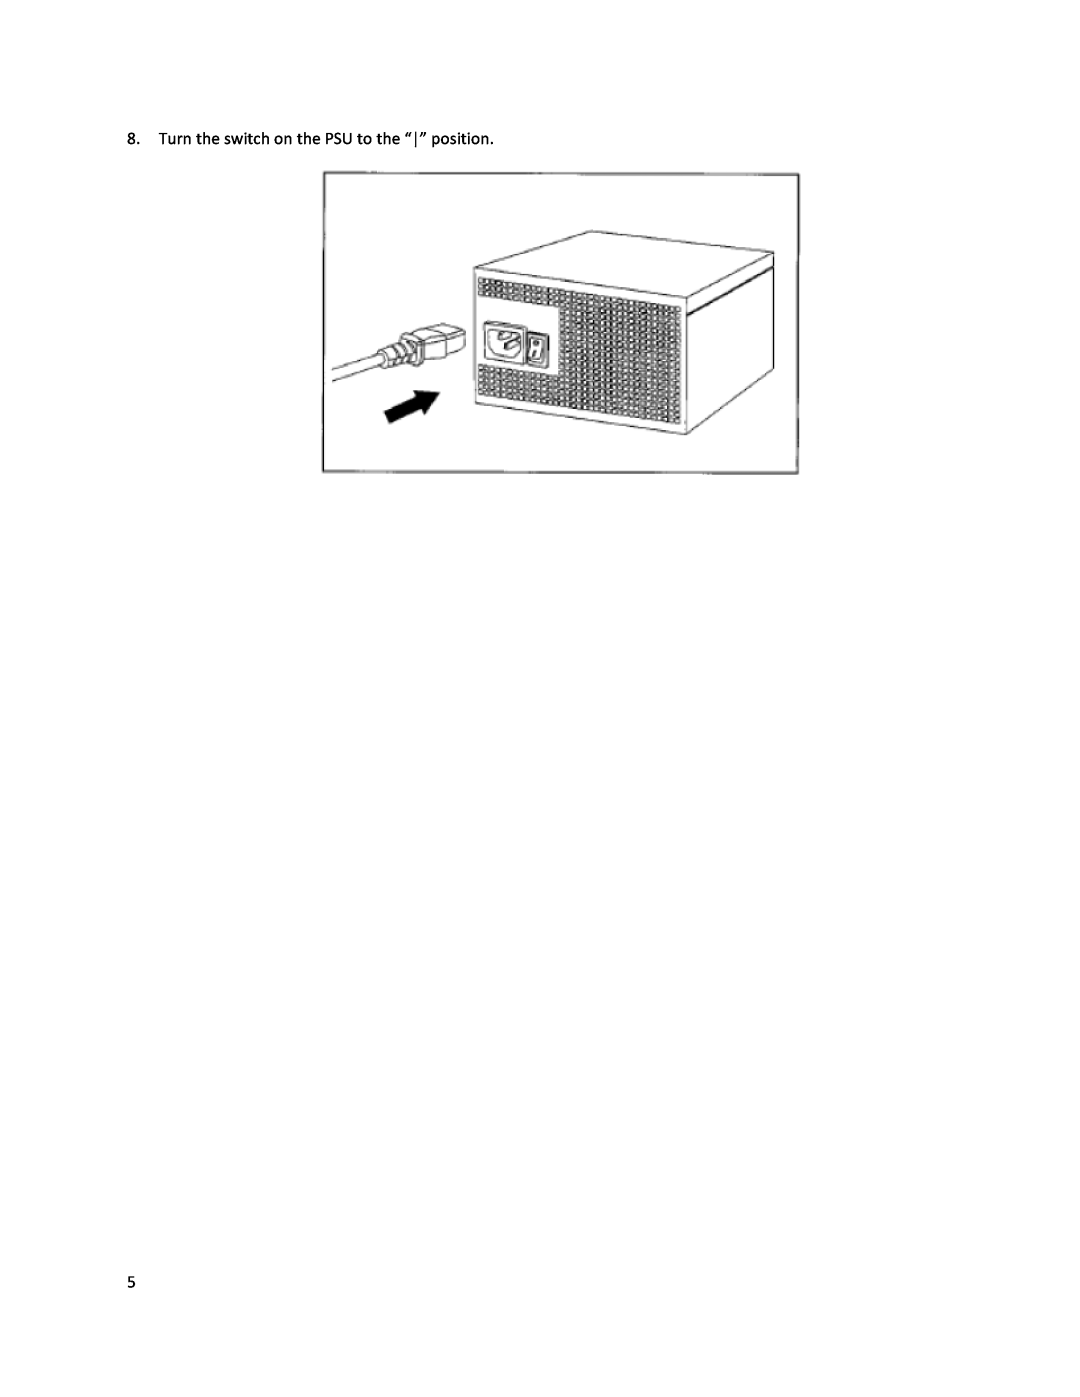 Antec HCG-520 user manual Turn the switch on the PSU to the “” position 